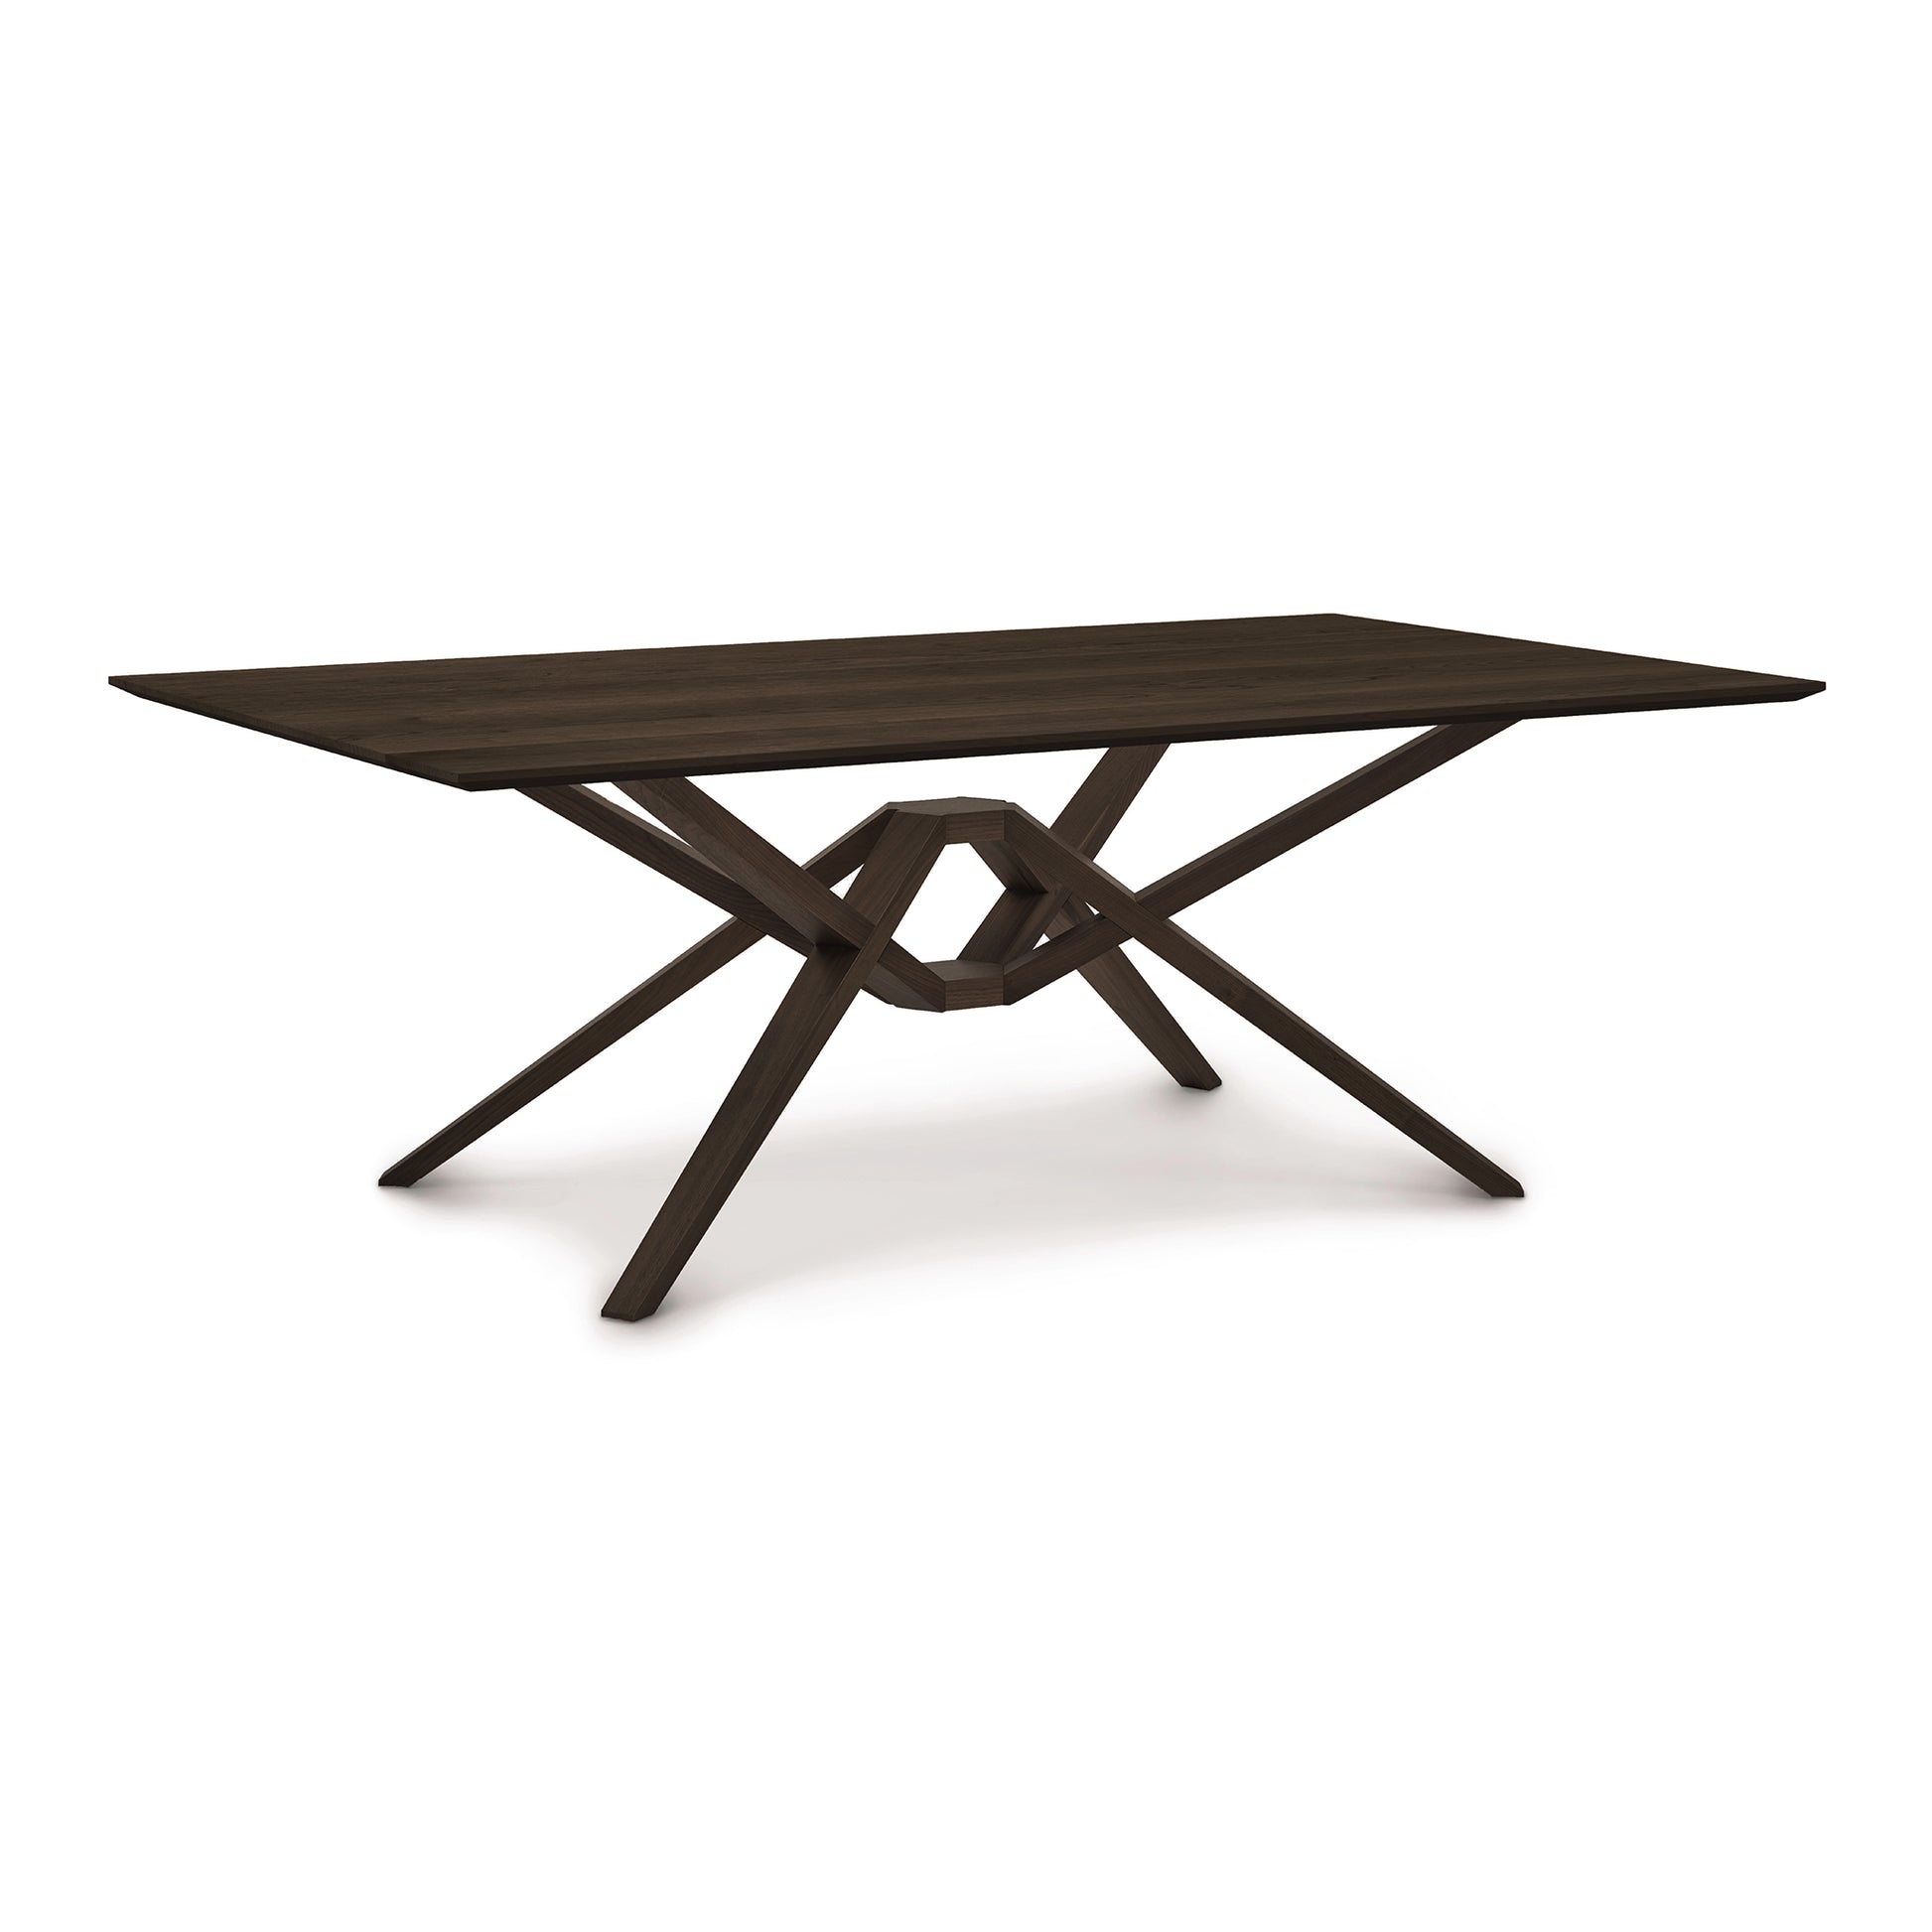 The Copeland Furniture Exeter Solid Top Dining Table is a modern design. It features a dark brown table top with a wooden base.